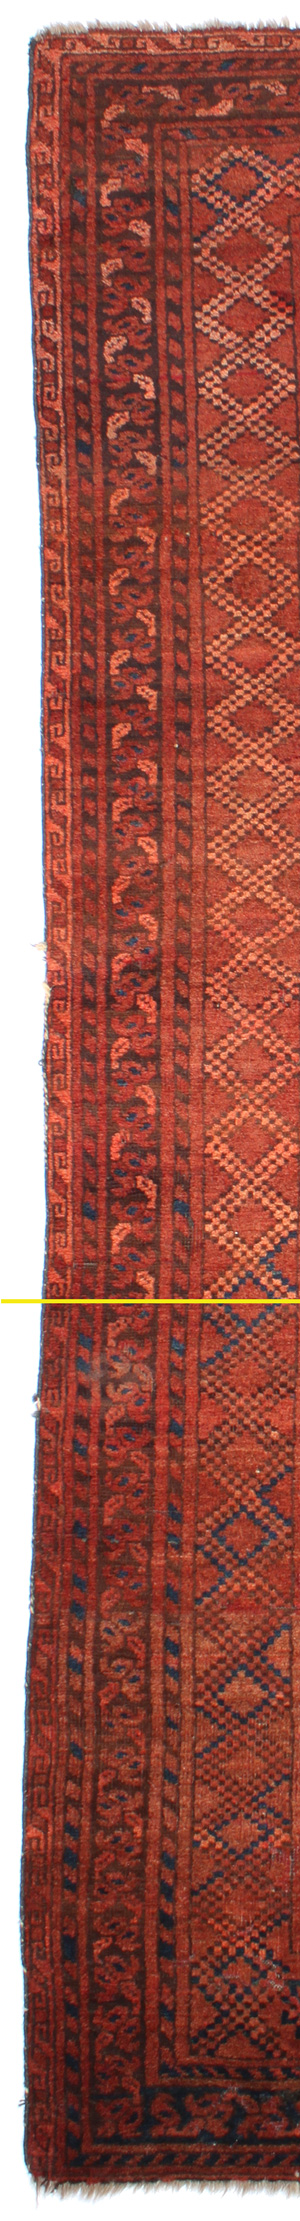 Antique Afghan Carpet - Northern Afghanistan - A mild change in the color palette - Back To List of Oriental Carpets and Rugs